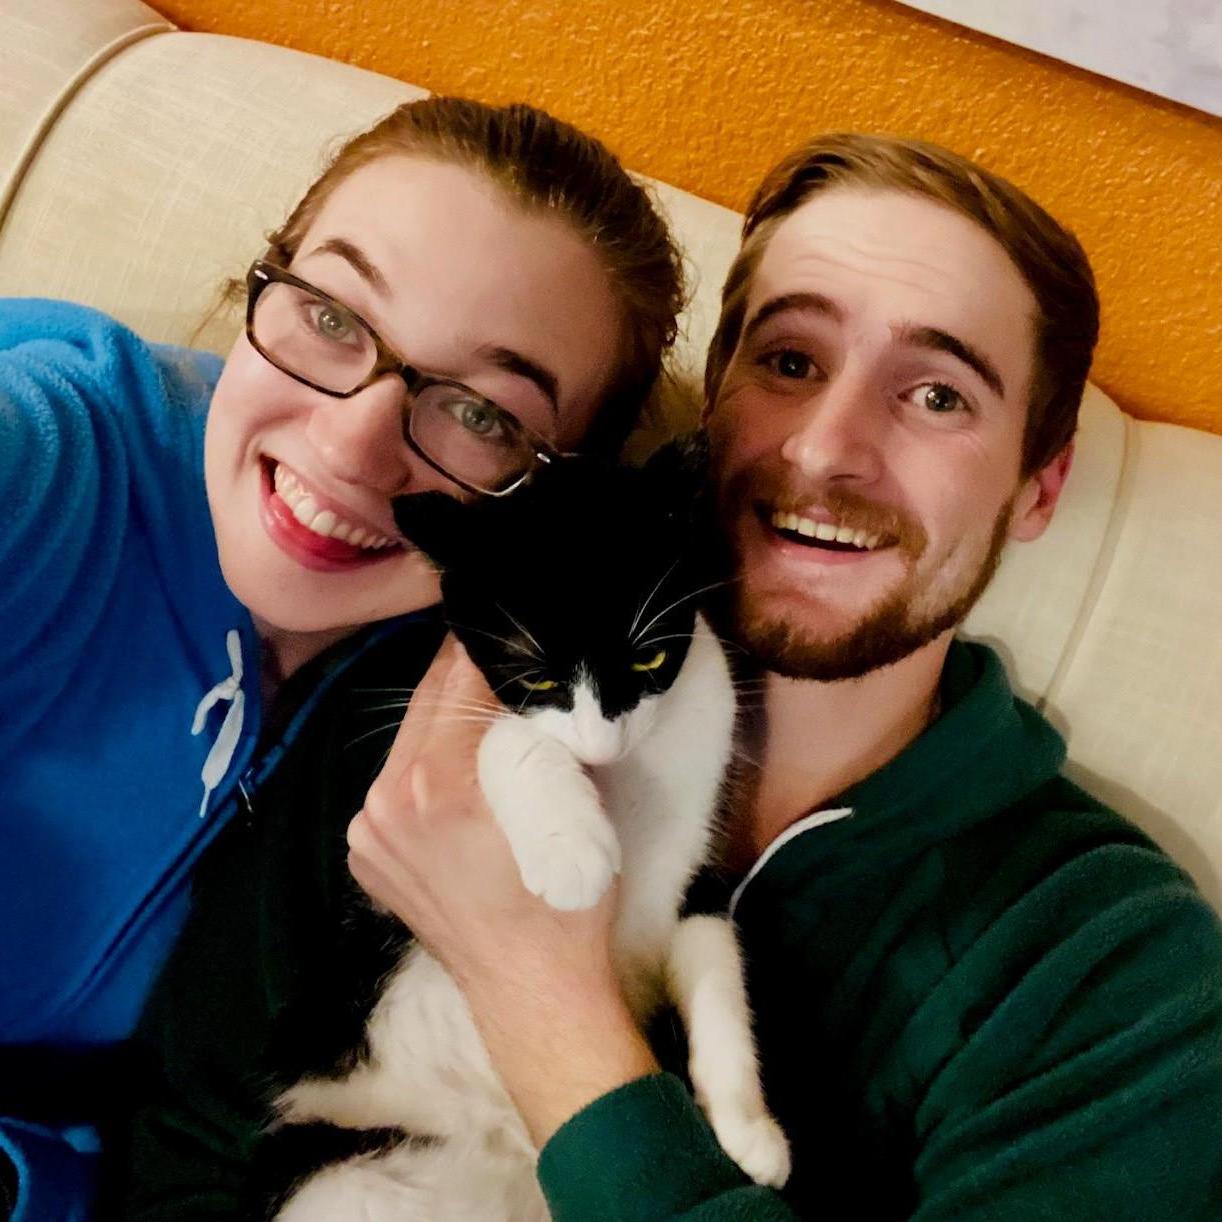 Us and our furbaby!!